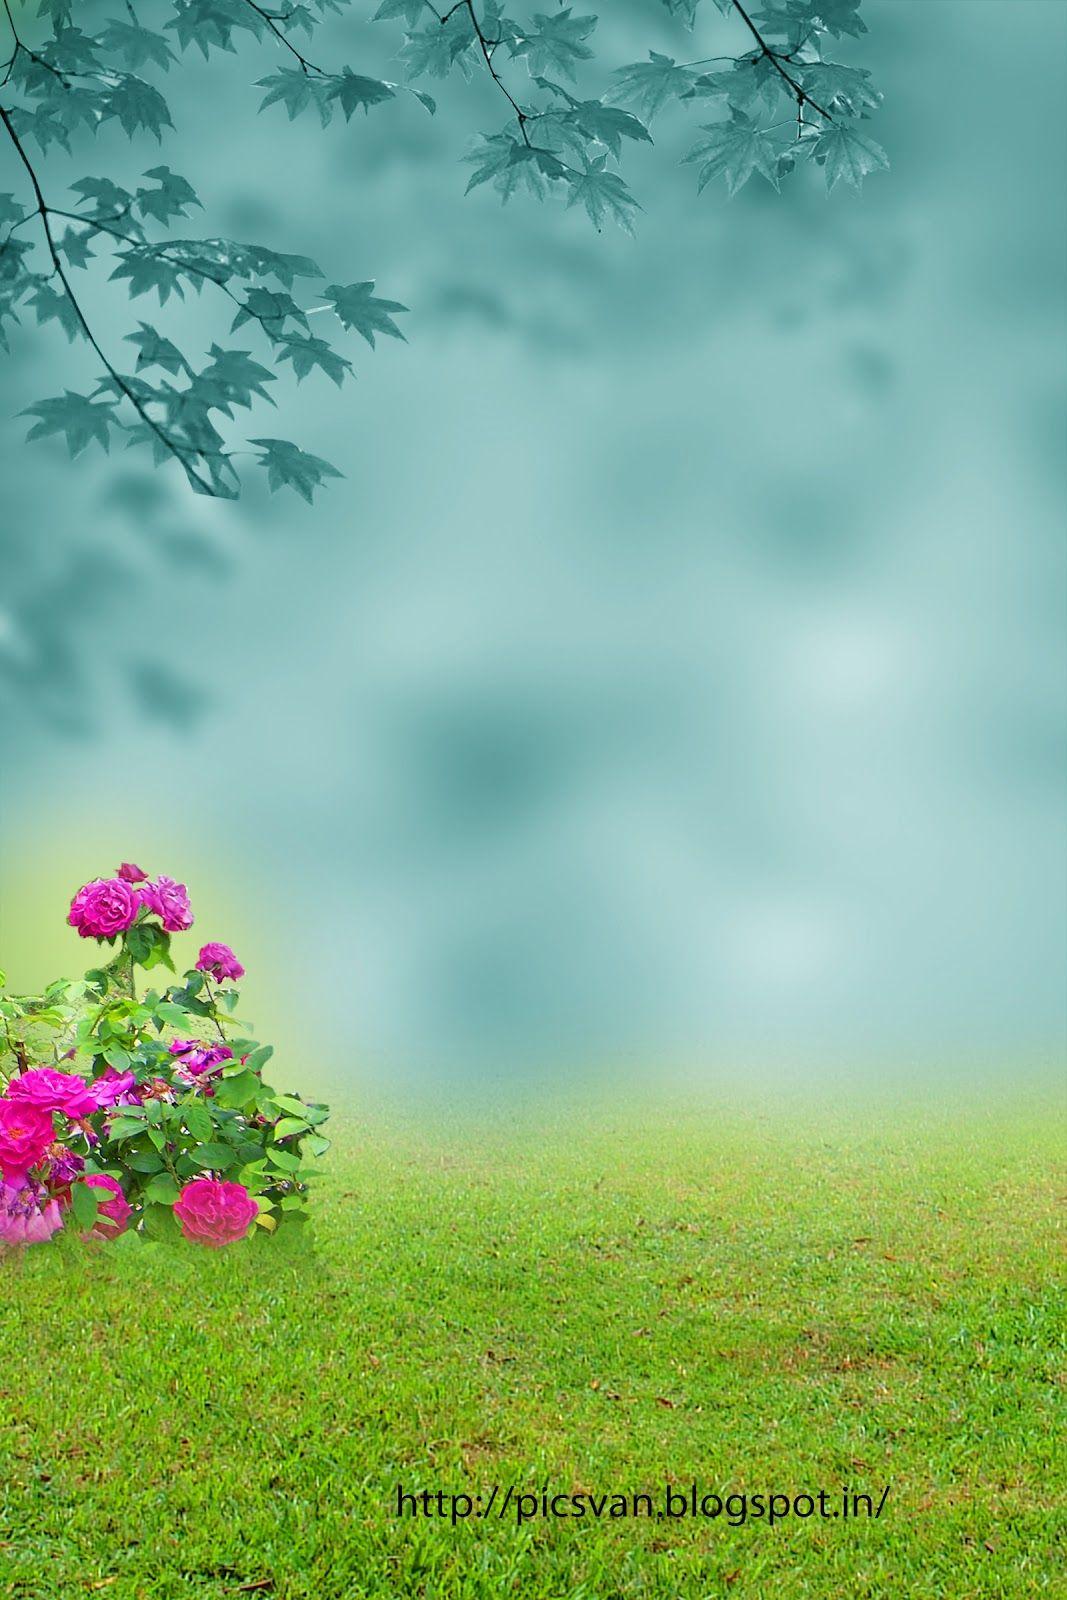 background image download for photoshop